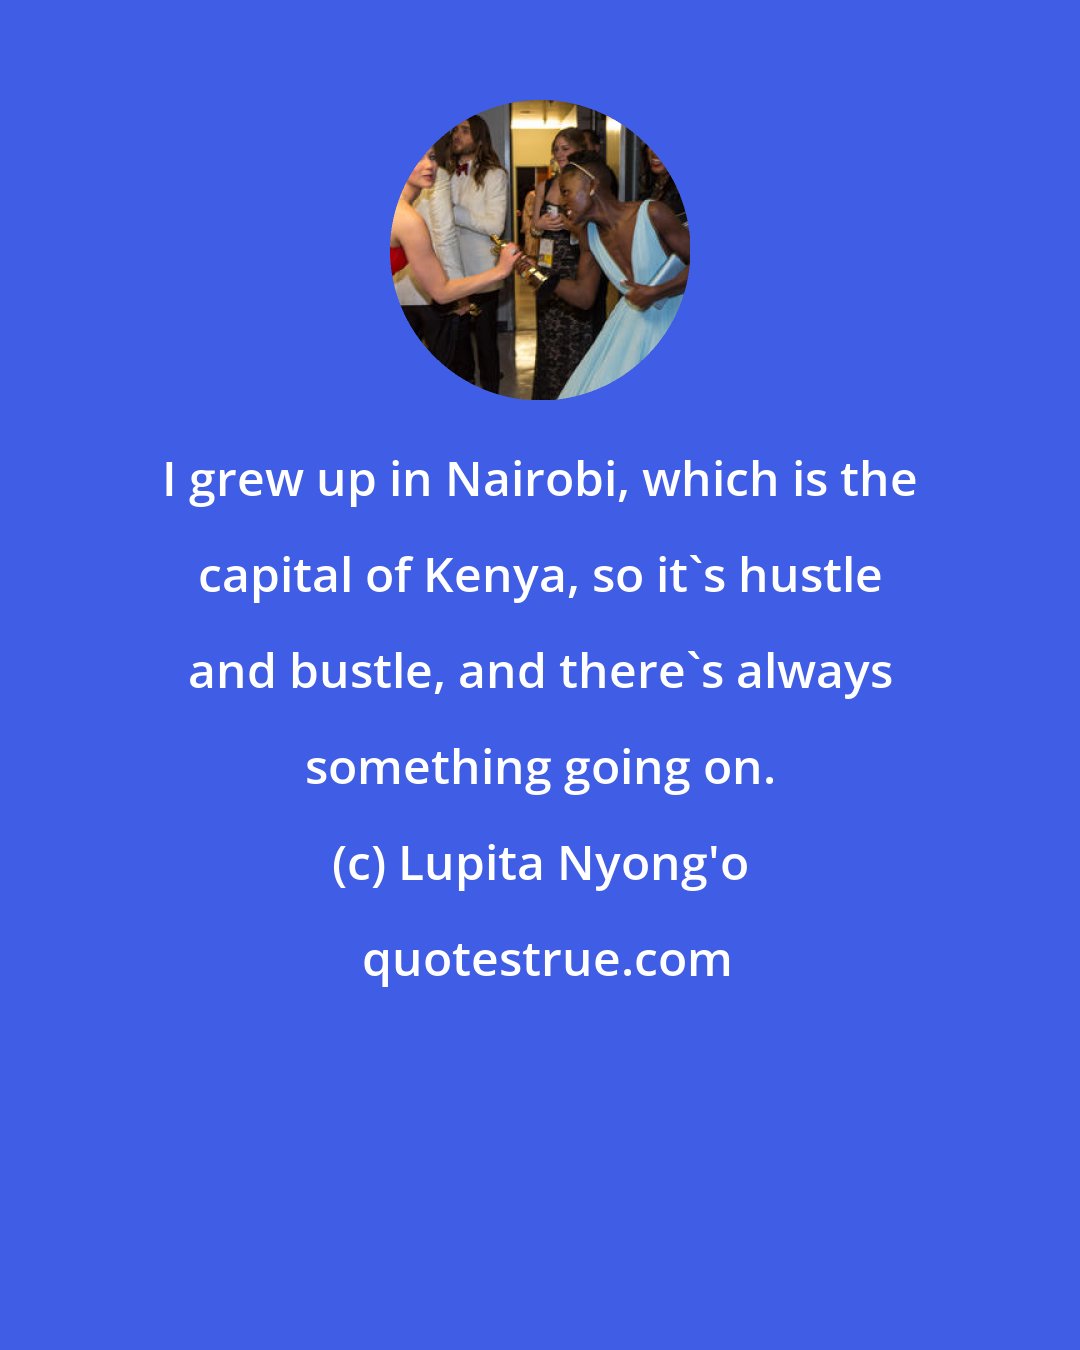 Lupita Nyong'o: I grew up in Nairobi, which is the capital of Kenya, so it's hustle and bustle, and there's always something going on.